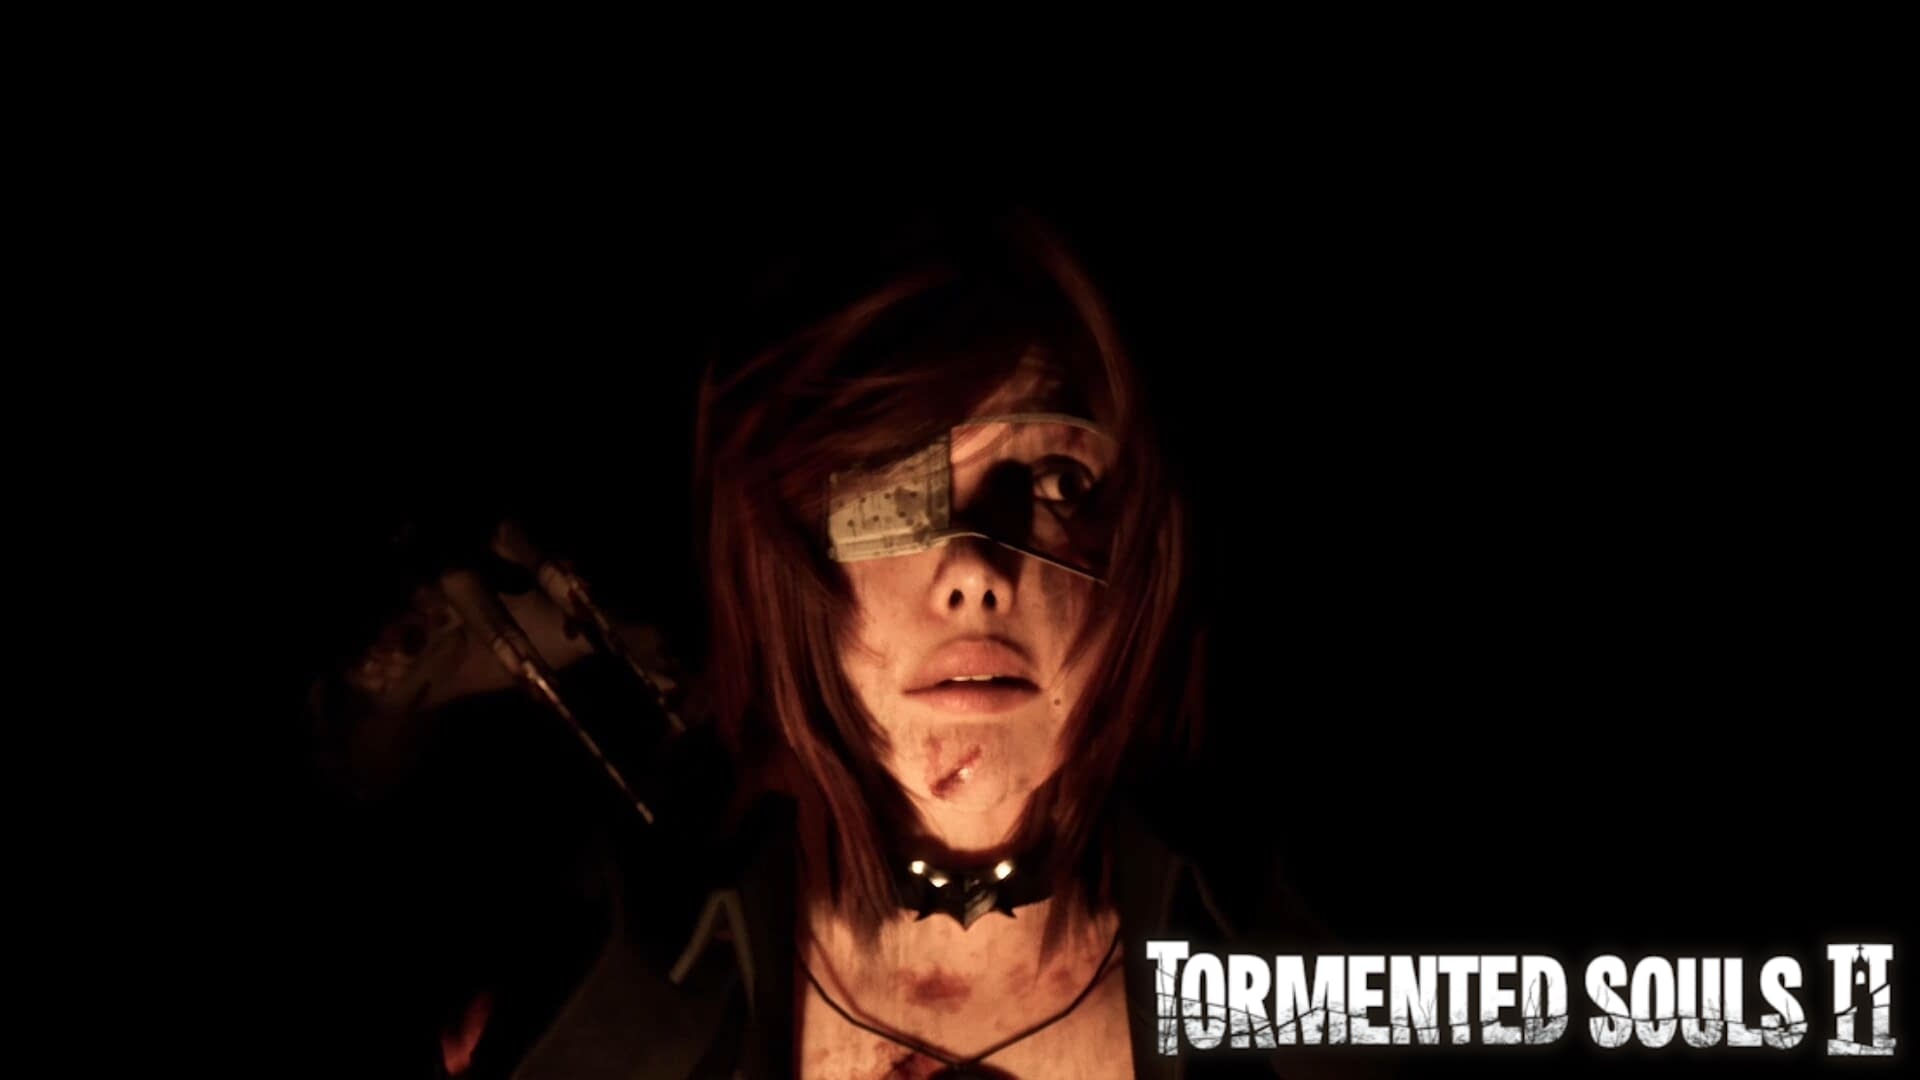 Tormented Suls 2 Announcement: First Fragman Published